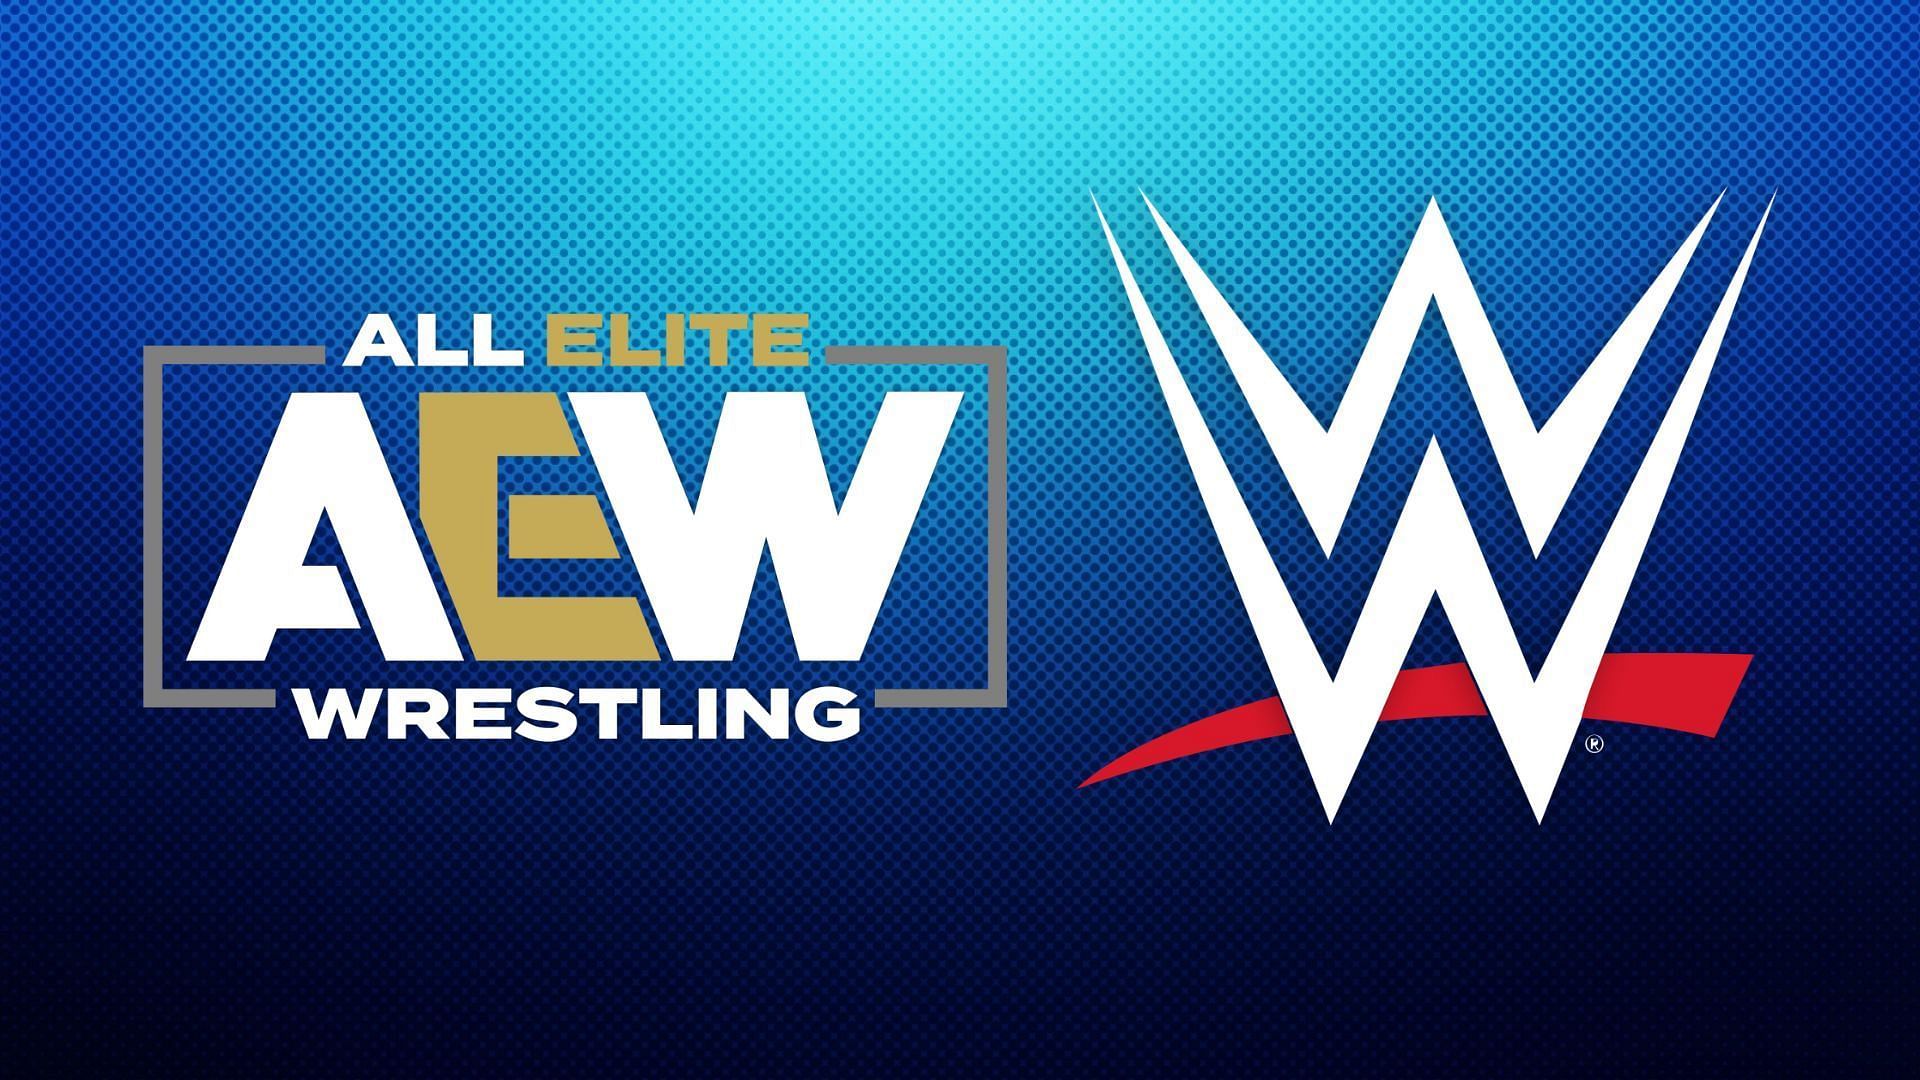 Reports suggest that a former AEW star has officially joined WWE.